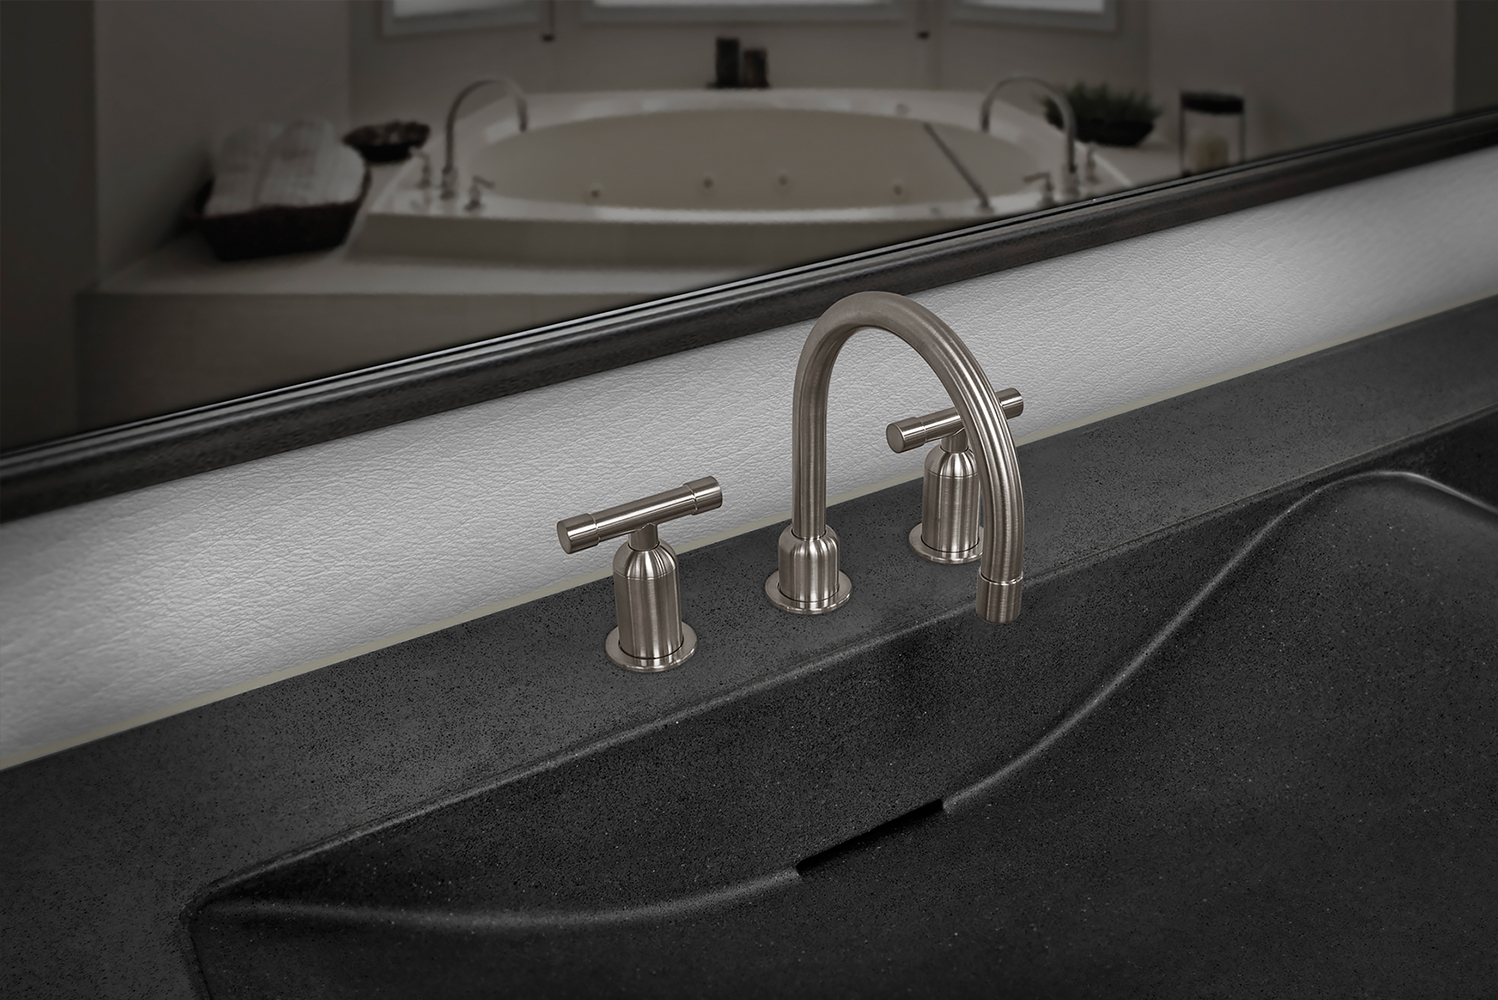 Sonoma Forge launched the WherEver faucets from the companys WaterBridge collection 